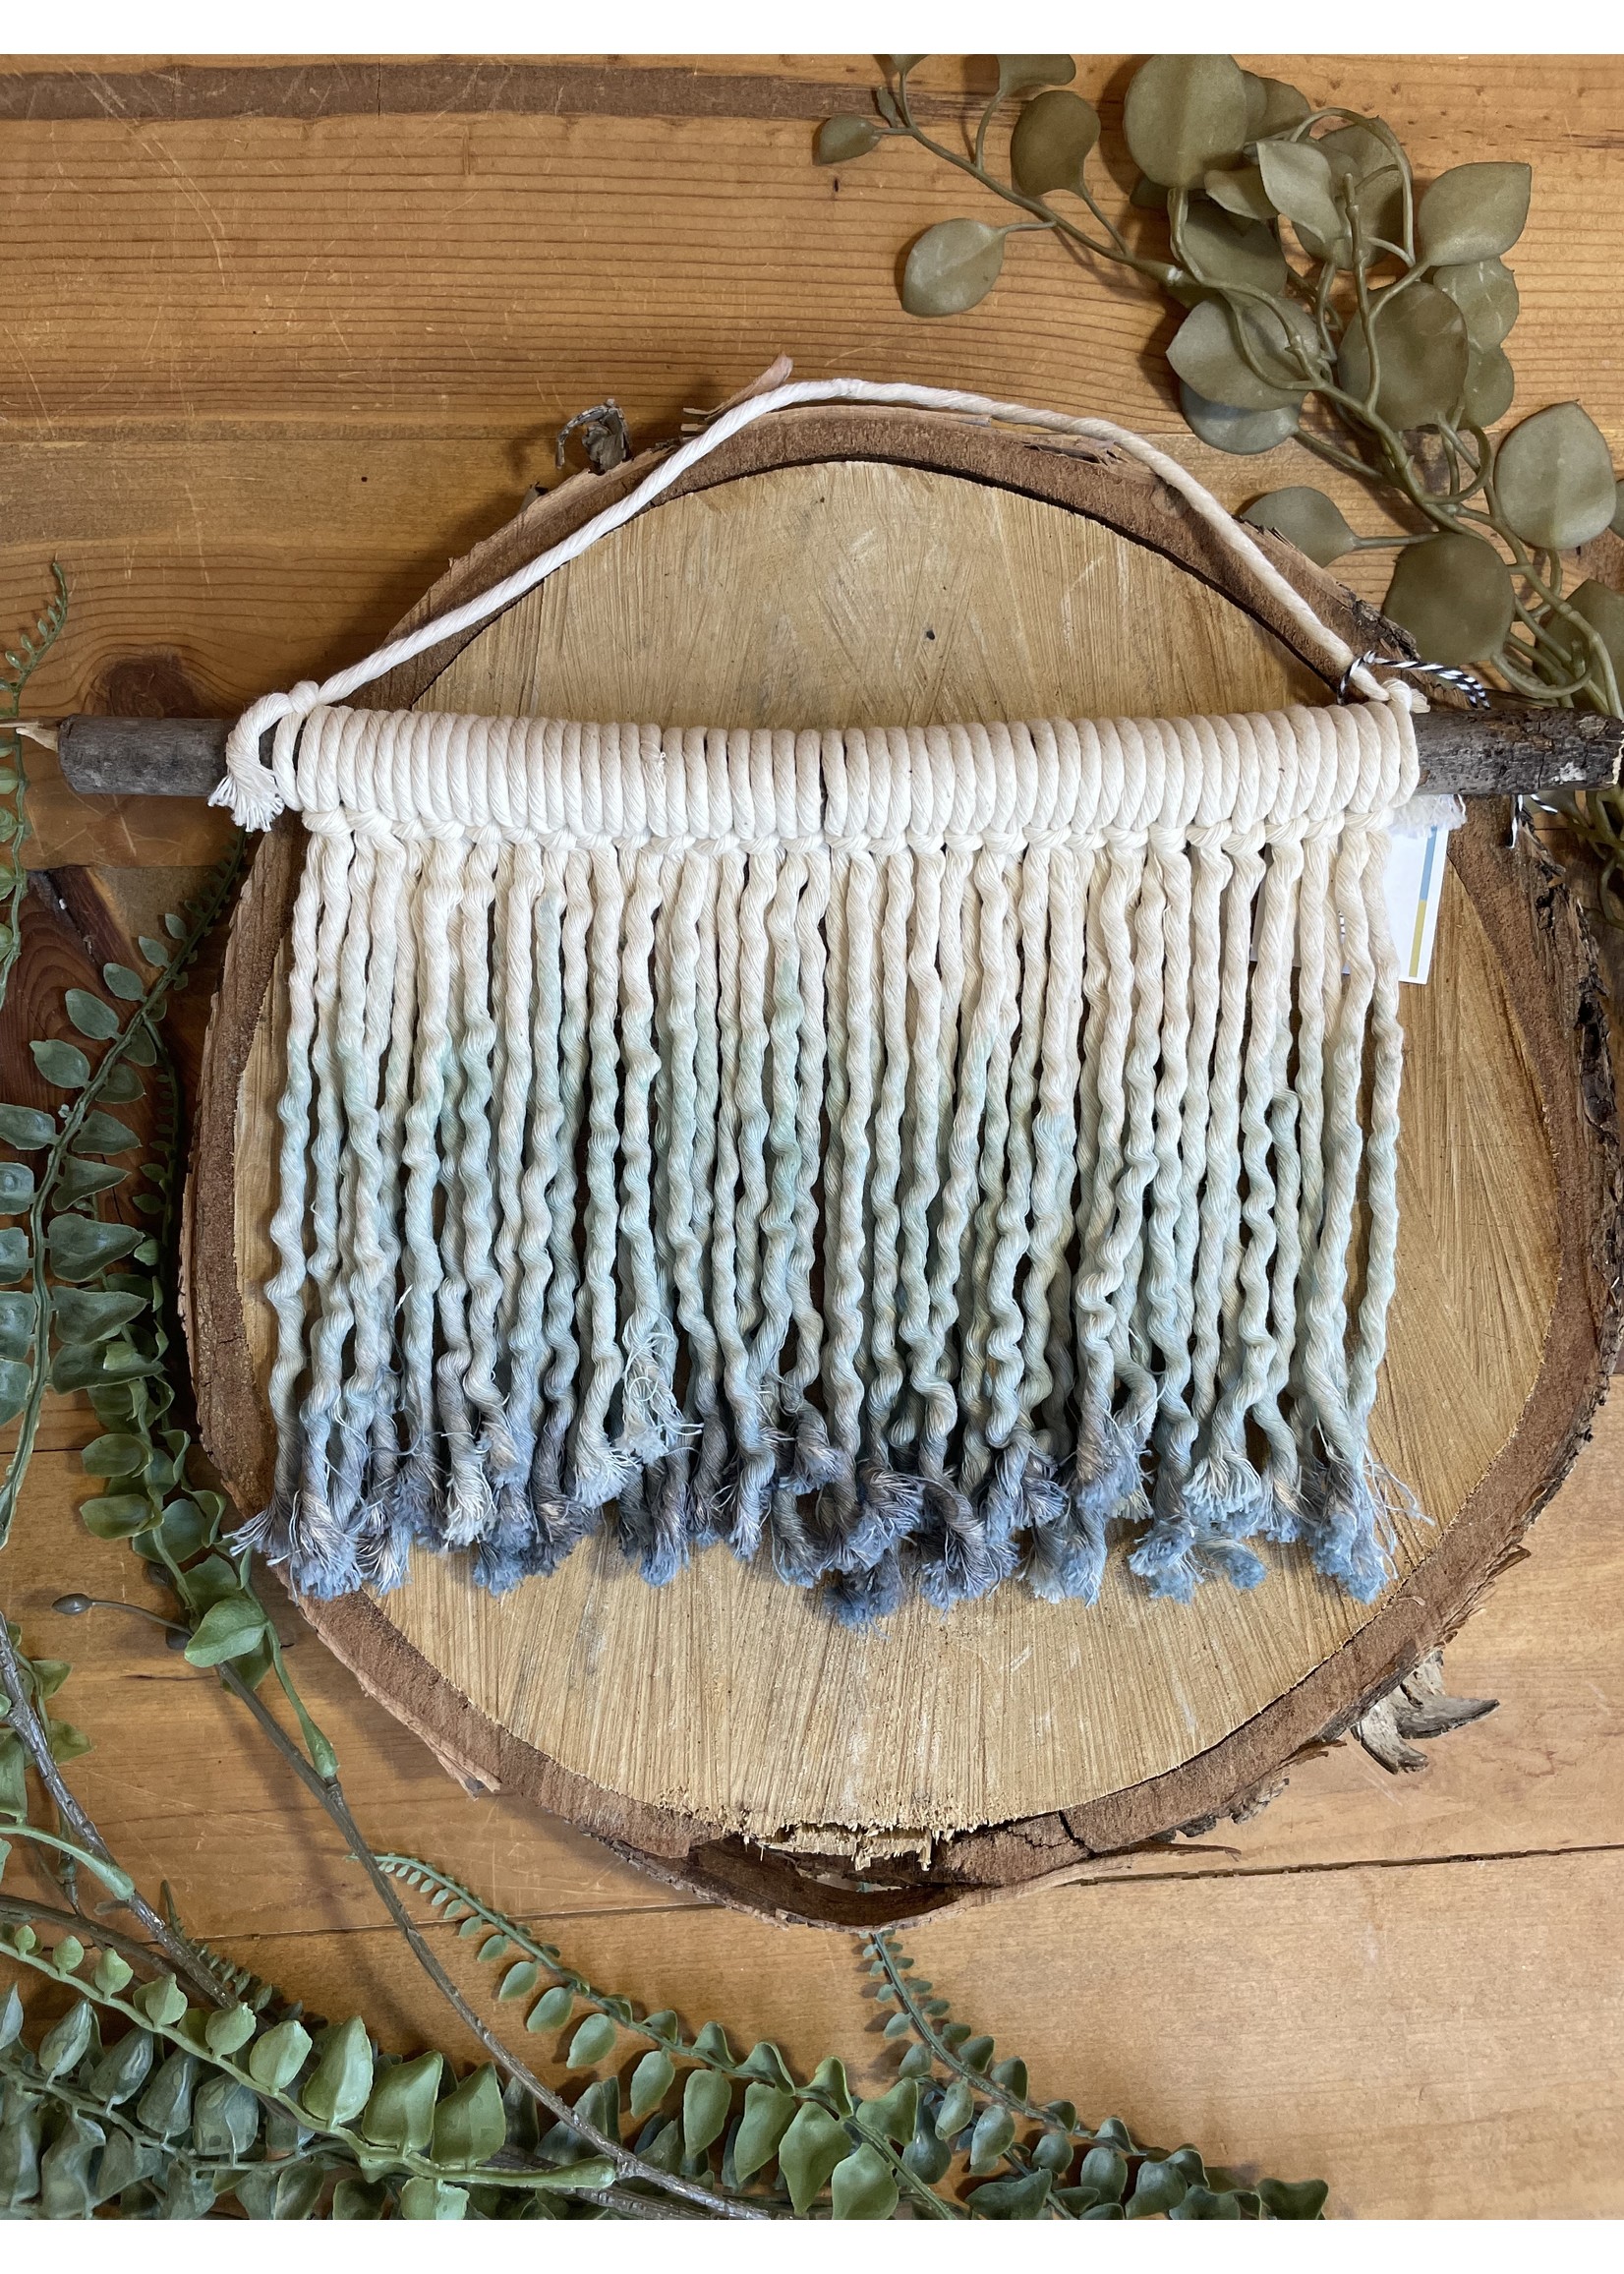 Tangled Up In Hue Wholesale Dip-Dyed Macrame Wall Hangings